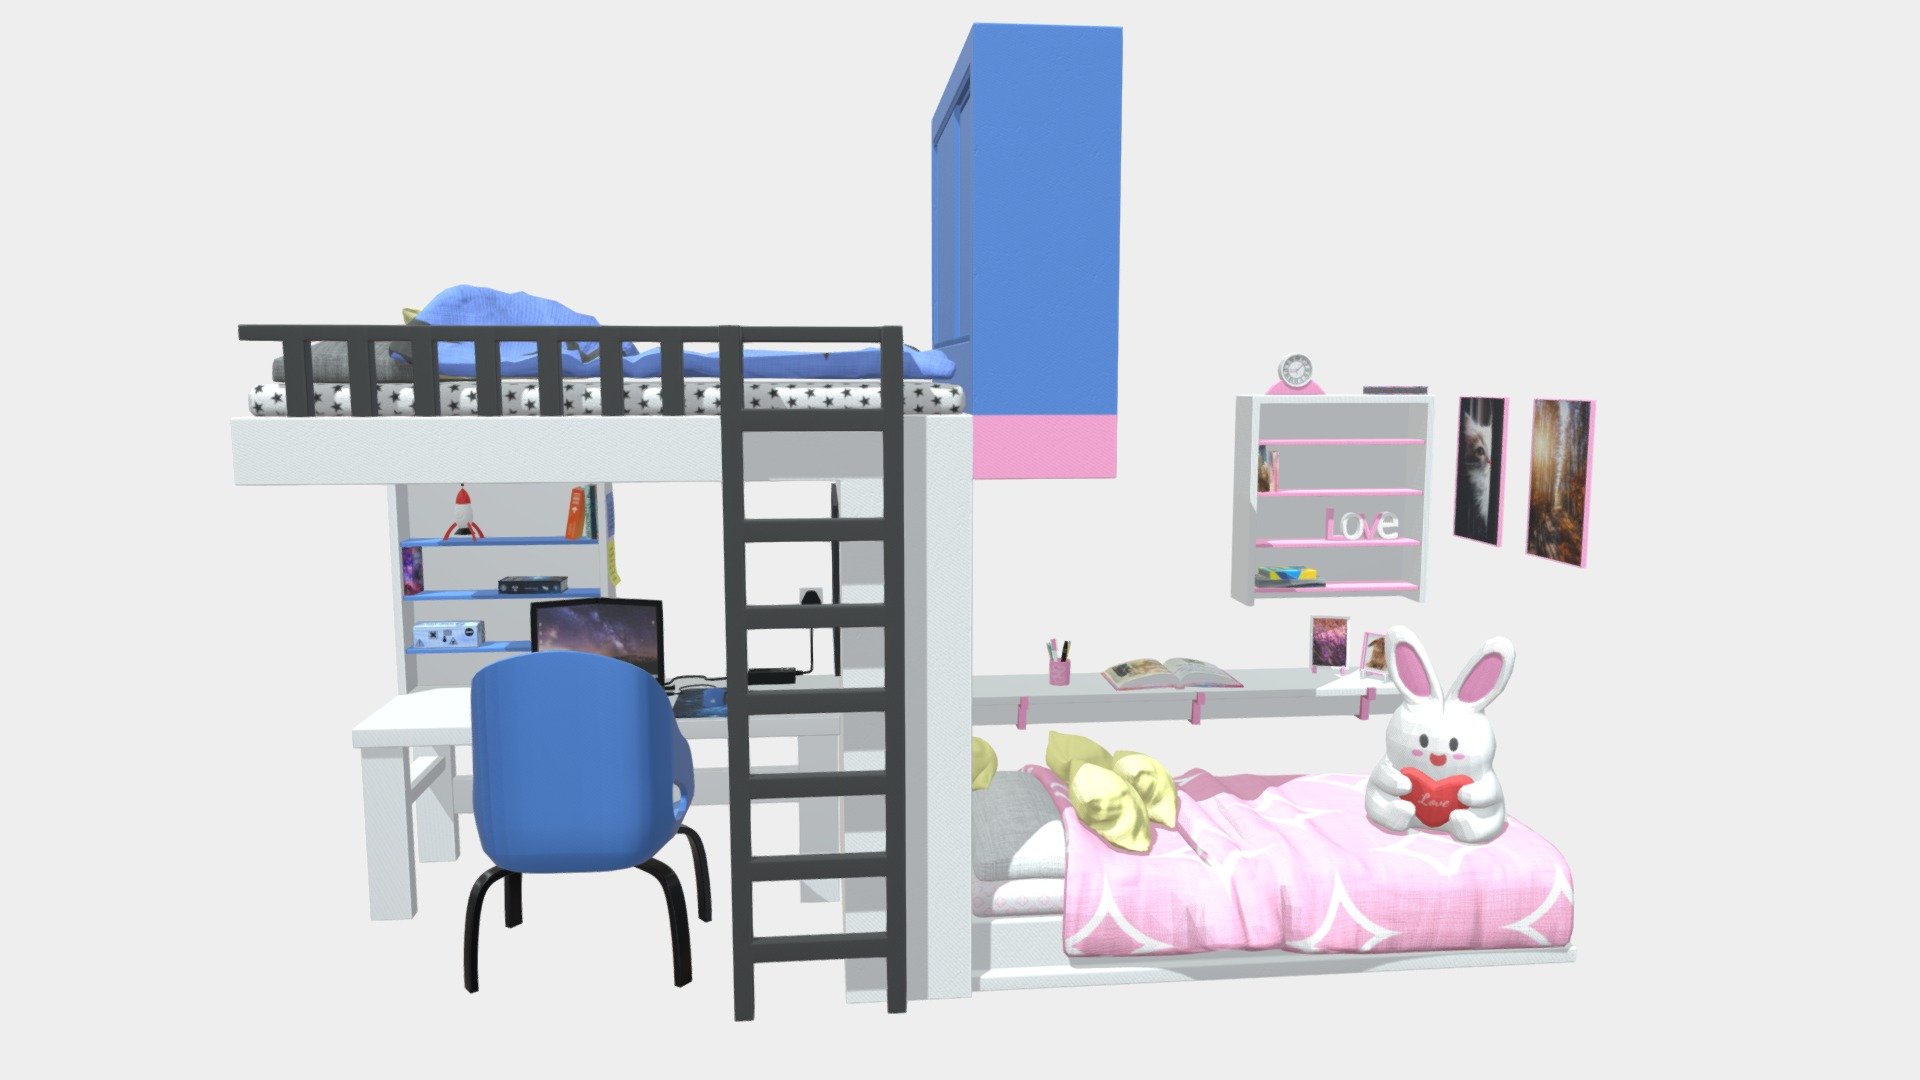 This children bedroom for one boy and one girl. This model was made as a interior for empty room. Also the models can be used separately.

This asset pack contains:

Model of children bedroom which include several interesting models. The texture are divided into nine groups each for specific part of this children room collection. Texture are divided separately for Bunny, computer, desk and chair, boy accessories, boy bed, girl bed, girl shelf clock and desk, girl accessories, wall wardrobe.

Technical information:

The model was made as a low poly with support edges so future smooth of the model is possible without unpleasent deformation.

Textures are in 4096x4096 but boy bed and girl bed is in 2048x2048.

Children bedroom - 65082 tris, 32747 faces, 65307 edges, 32764 verts.

Contact details:

lukas.boban123@gmail.com

https://www.facebook.com/lukas.boban/

Thank you for taking look please consider leave like.

Model will be free till 14/04/2021 3d model